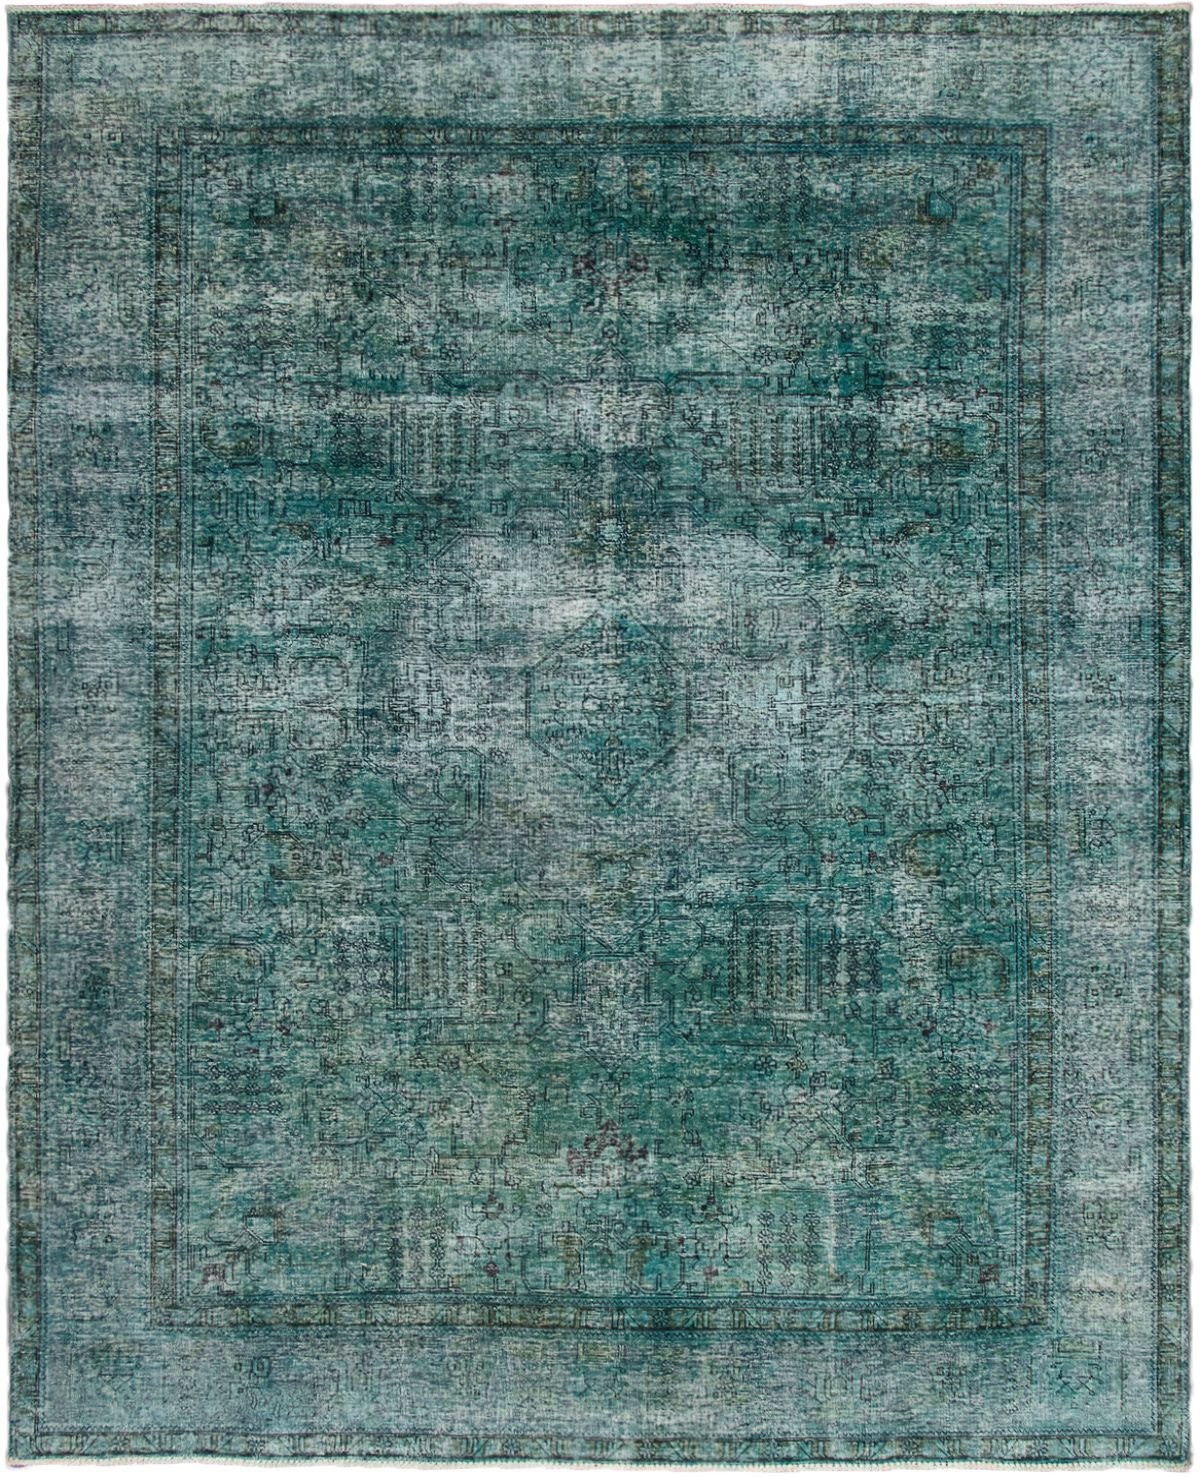 Hand-knotted Color Transition Teal Wool Rug 10'0" x 12'6" Size: 10'0" x 12'6"  